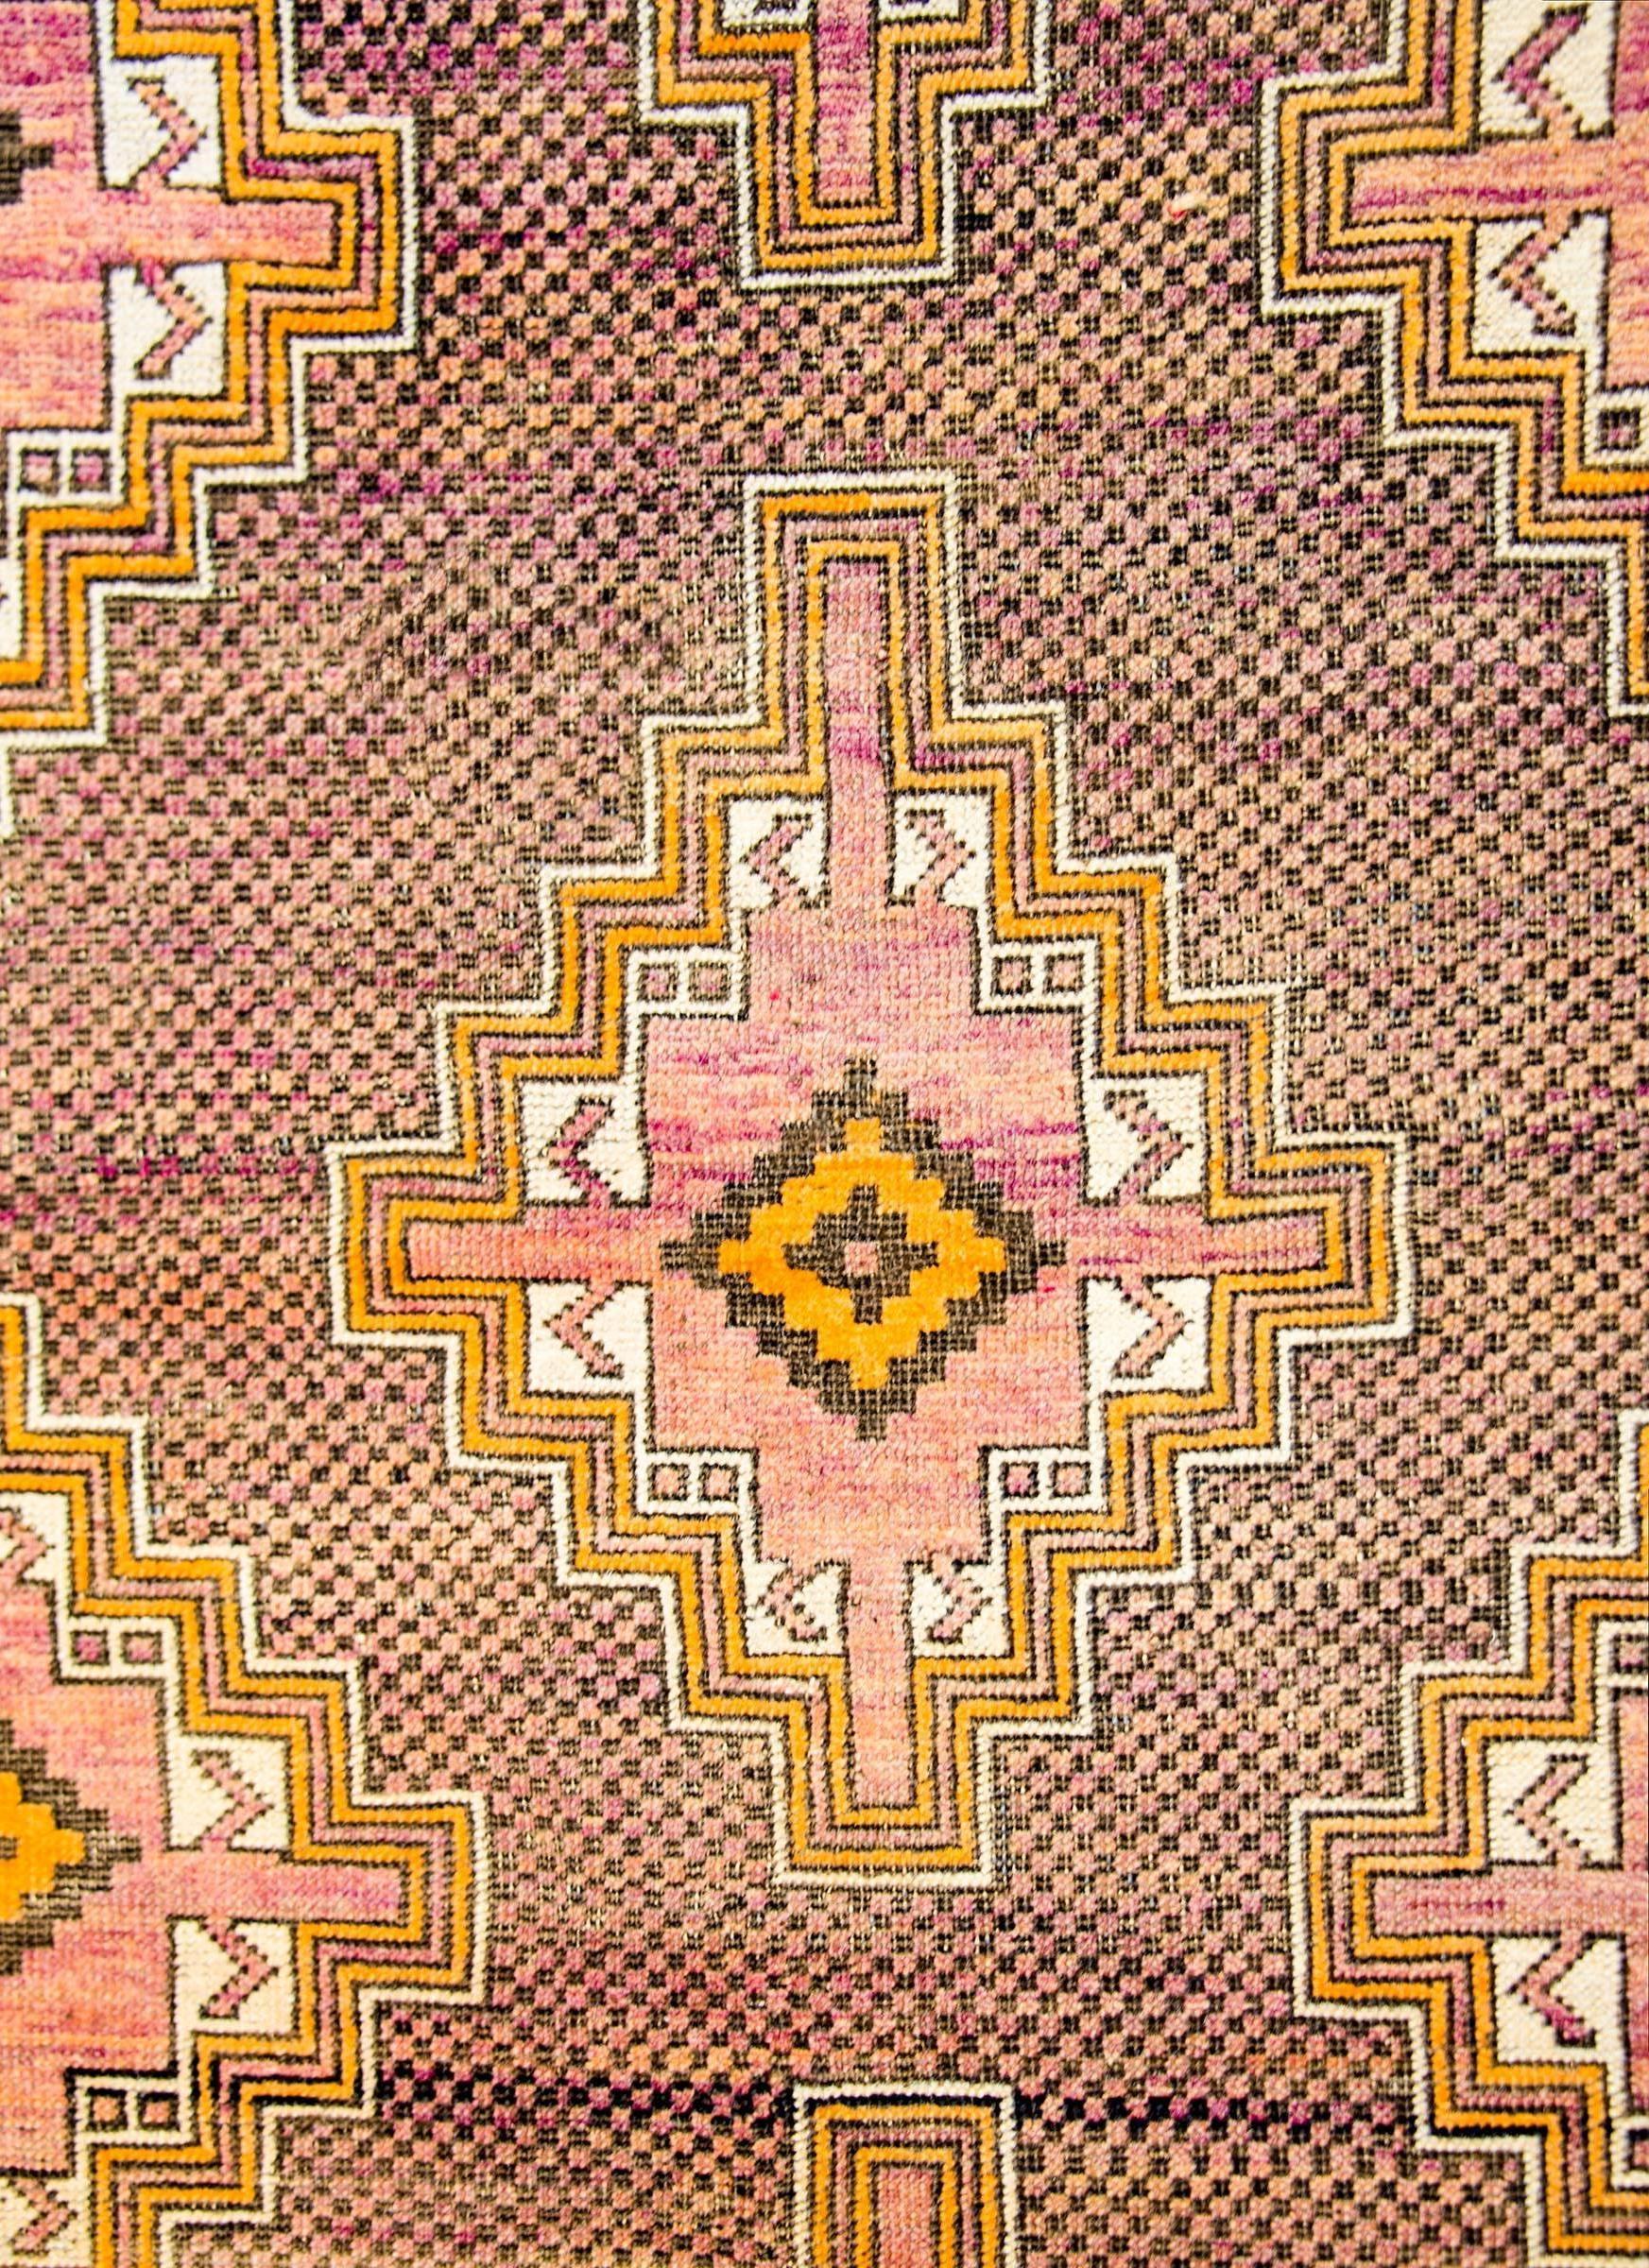 A wonderful mid-20th century Persian Baluch rug with three stepped diamond medallions woven in gold, pink, black, and white, on a beautiful small-scale black and violet checkerboard patterned ground. The border is simple, with a wide checkerboard